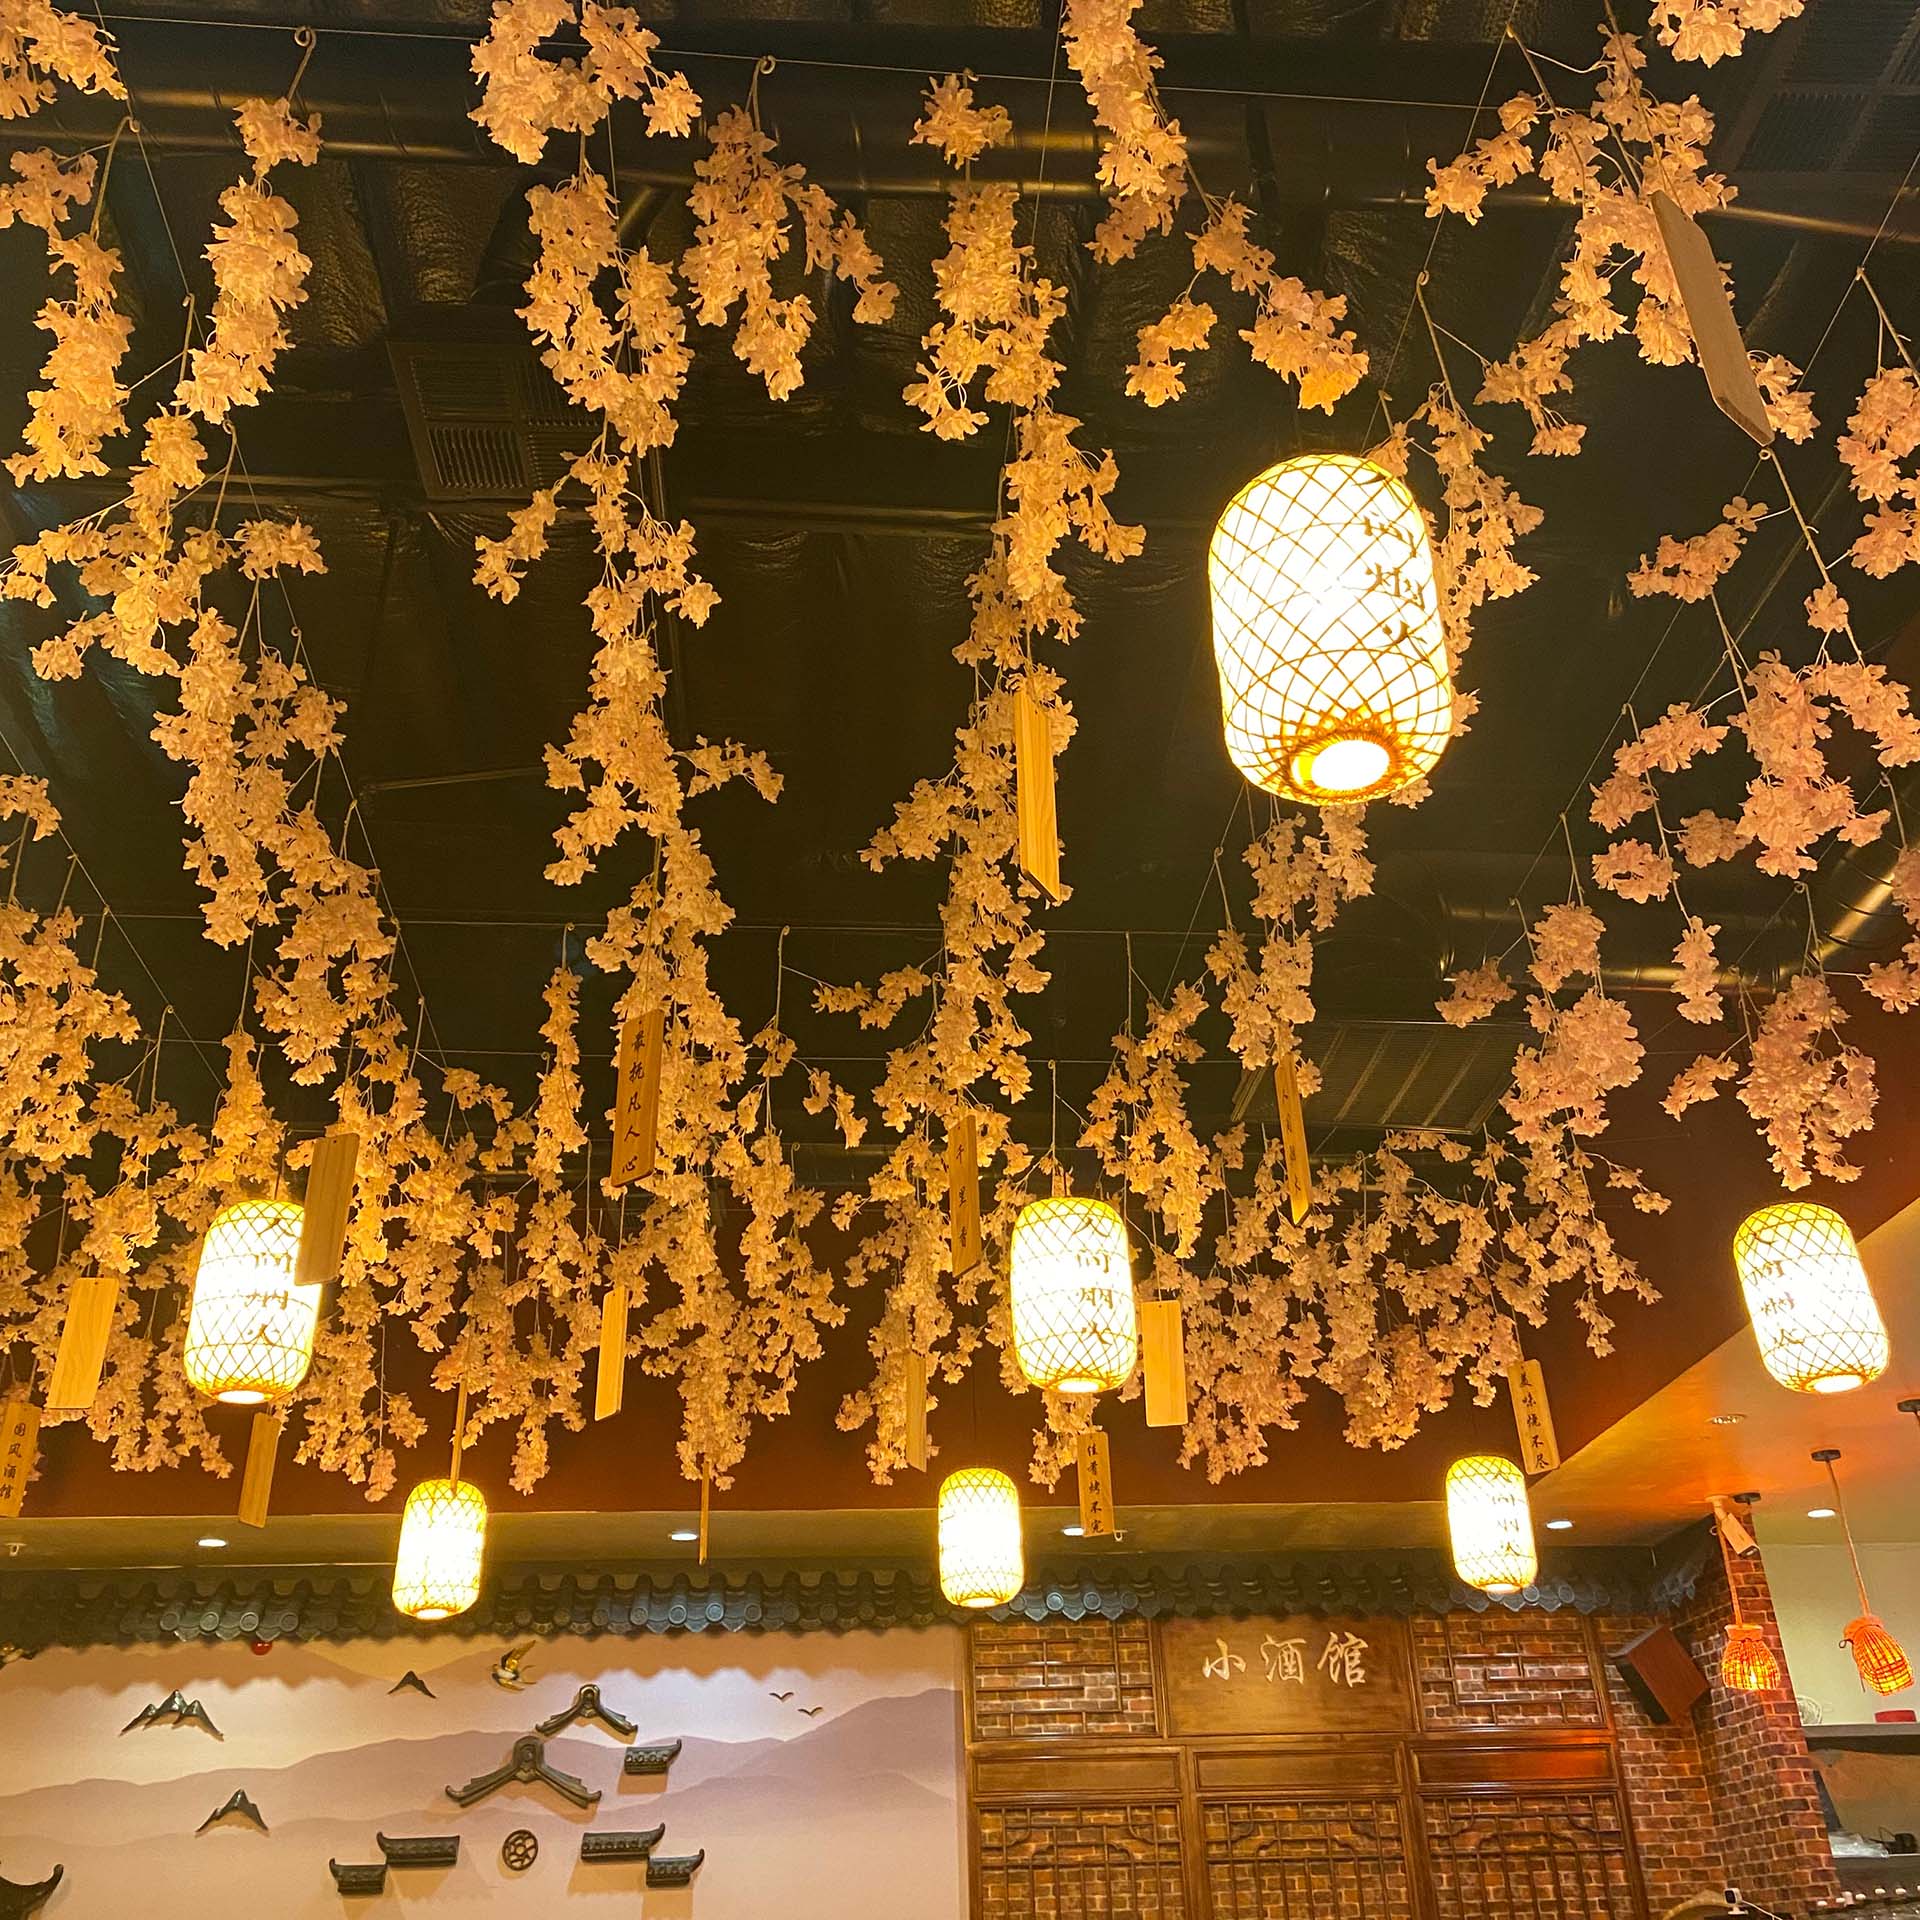 Spring blossoms and paper lanterns hanging from the ceiling of a traditionally decorated Chinese restaurant.